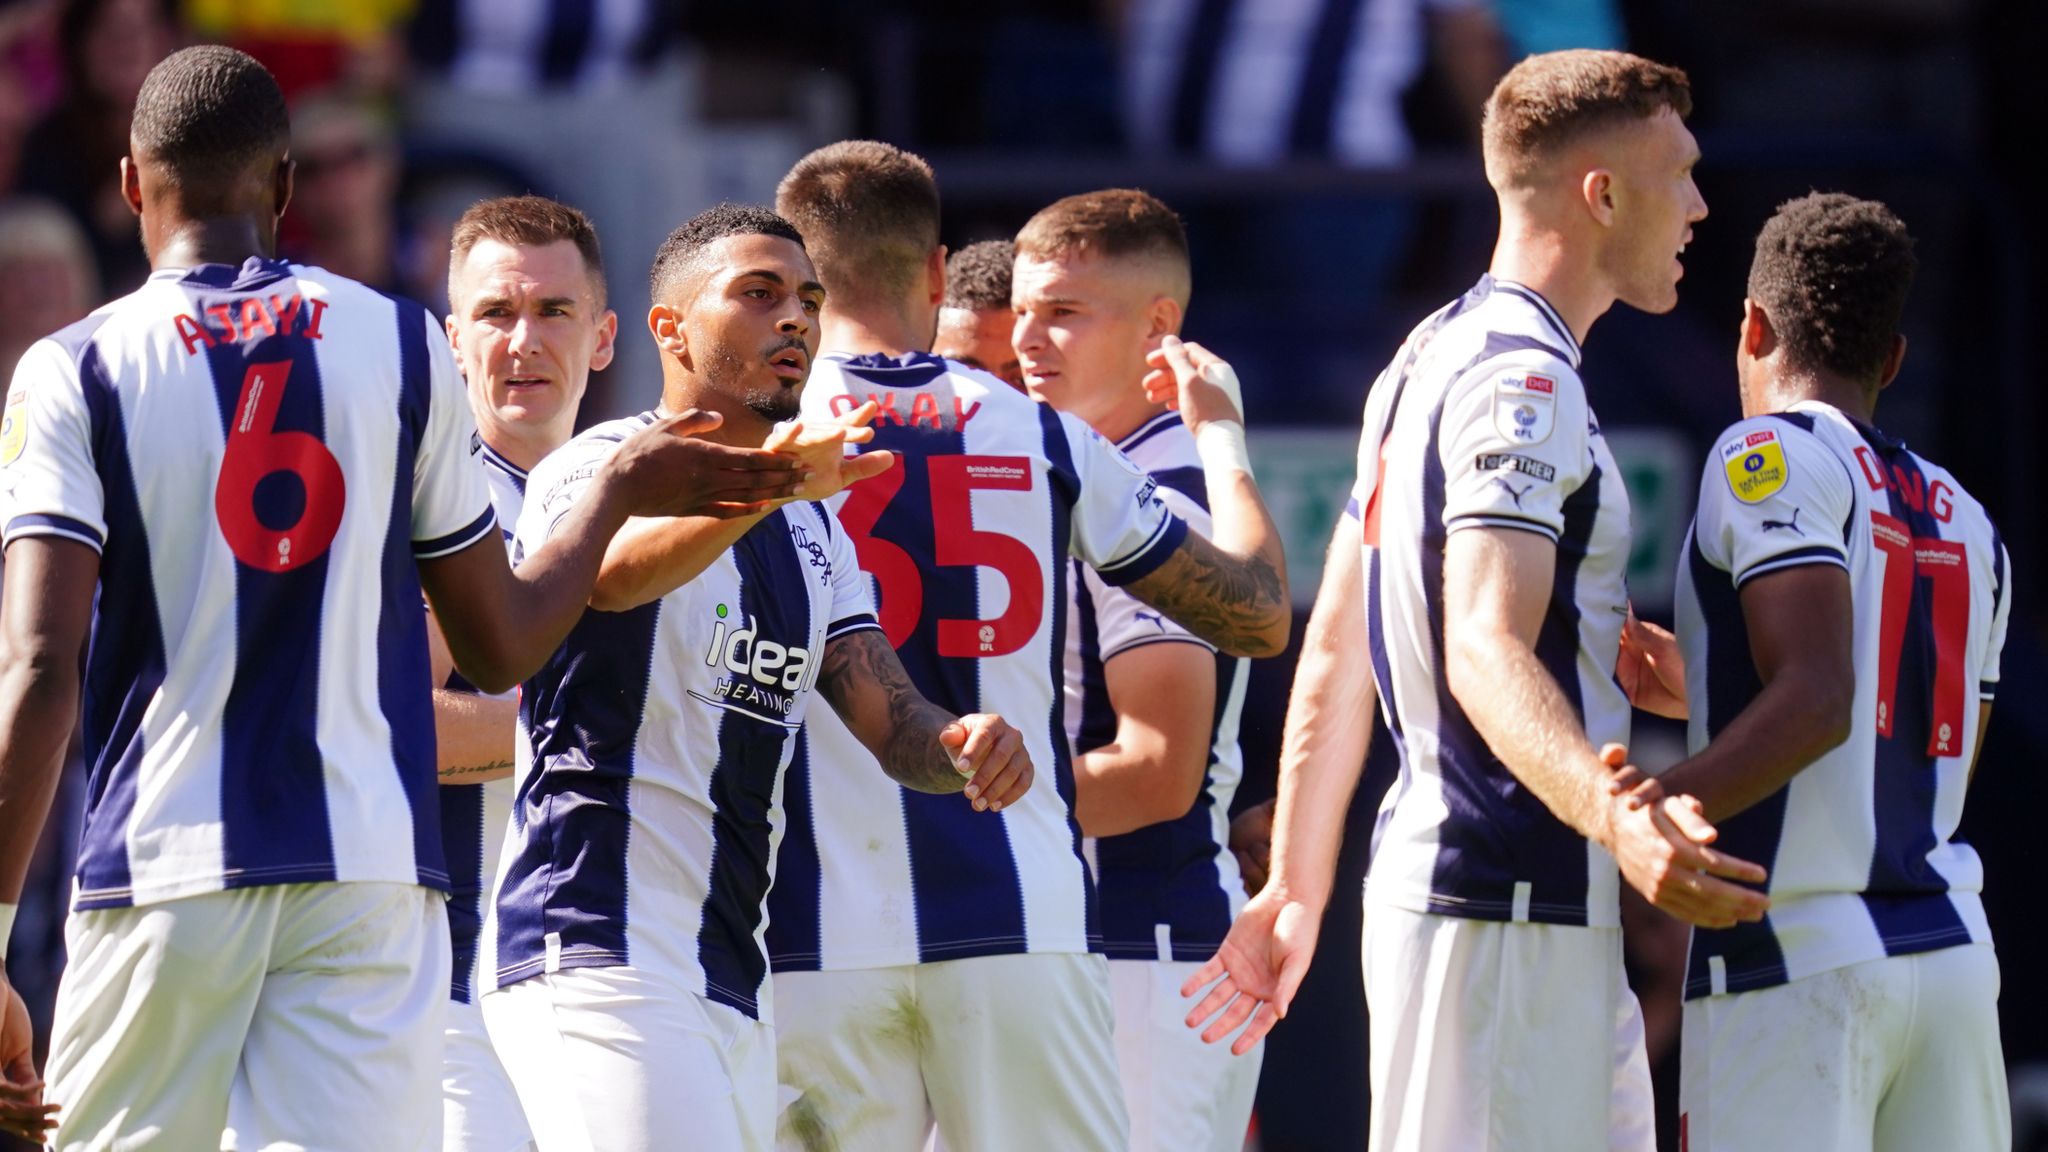 Meet the opposition, West Bromwich Albion